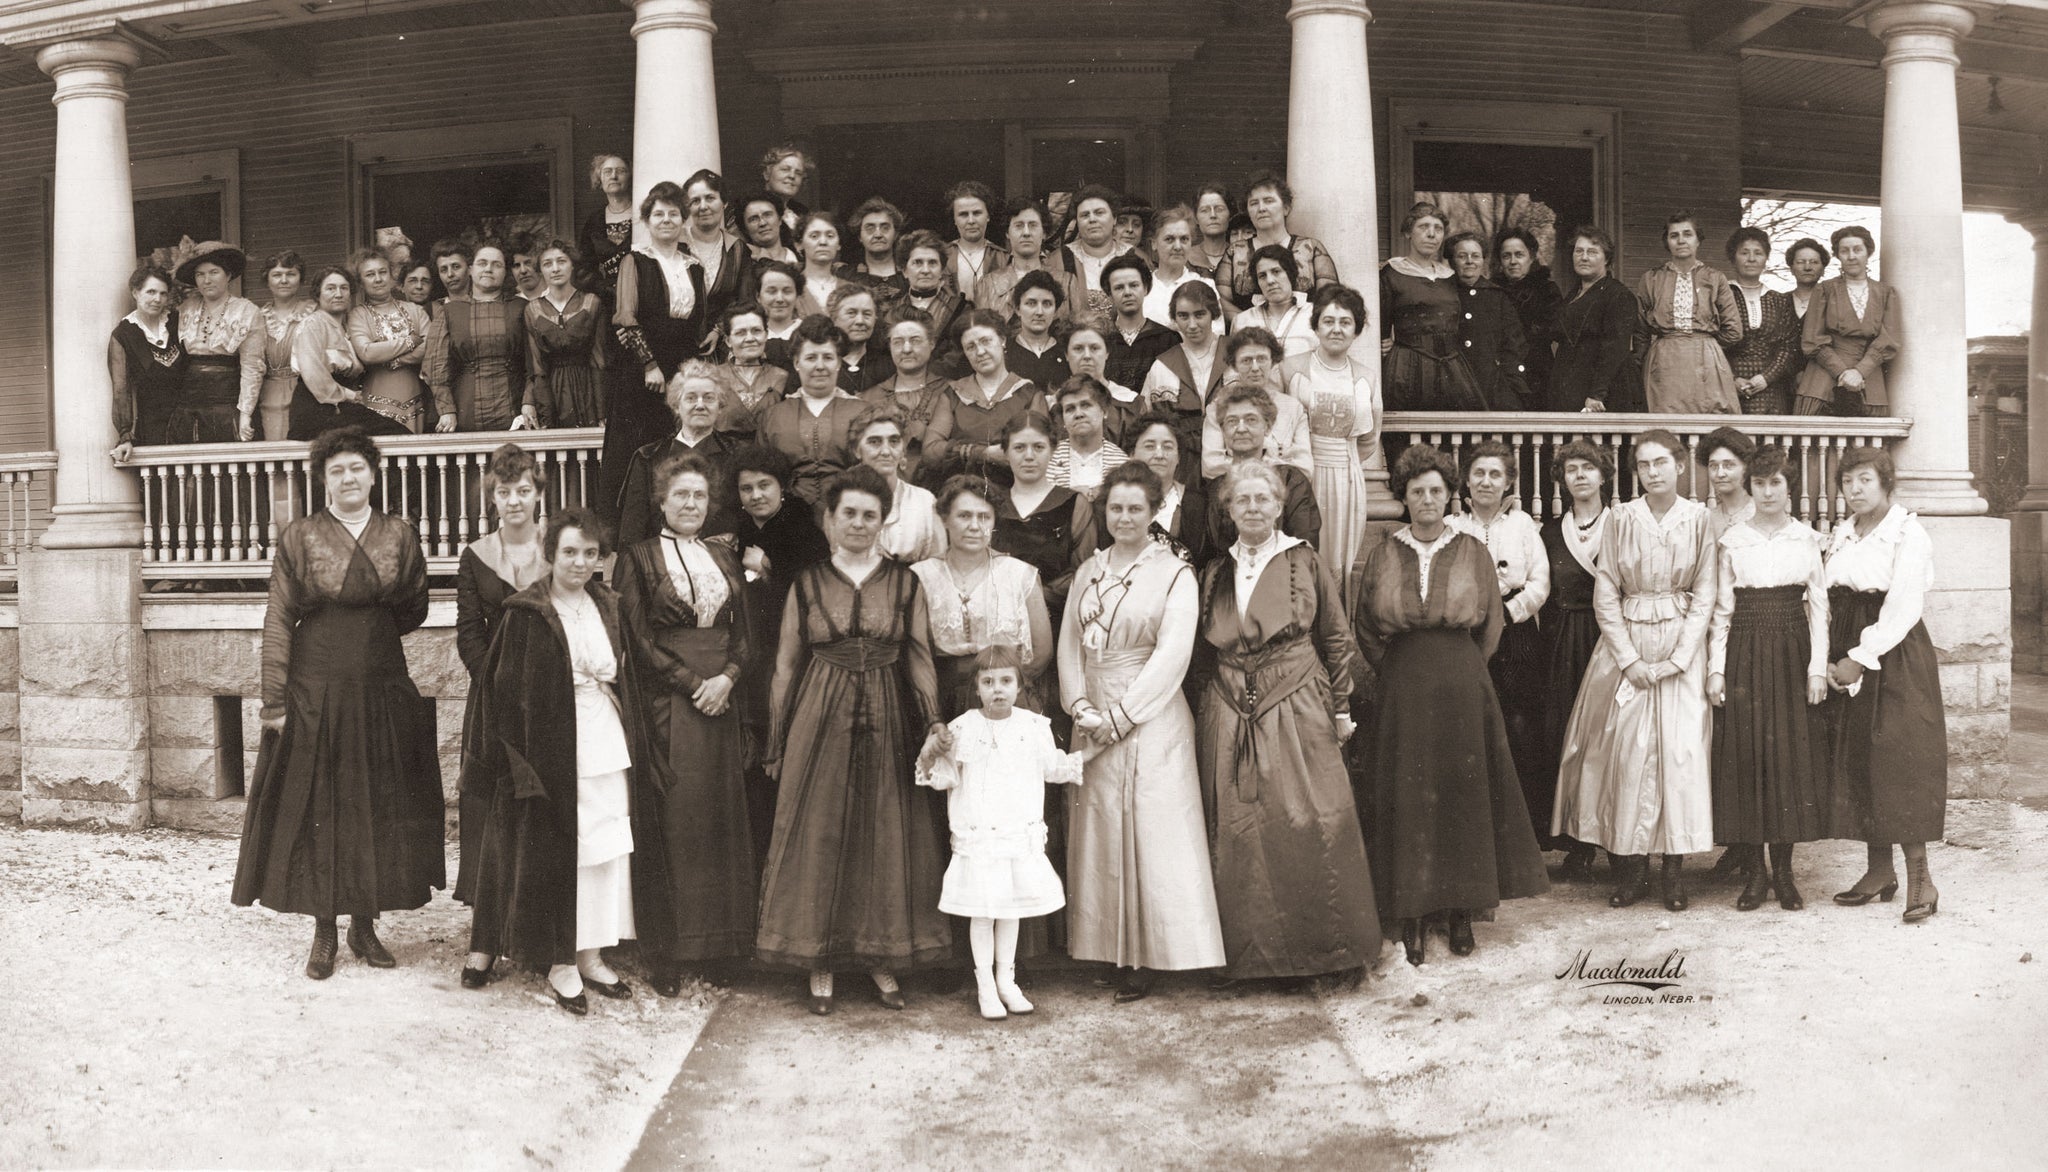 Nebraska Legislative Ladies League in front of the Governor's mansion, Lincoln, 1917. Gov. Keith Neville was Governor from 1917 to 1919. In this photo, Mrs. Neville was taking over as honorary president from Mrs. Morehead. The little girl in front is Mary Nelson Neville. -- Courtesy Nebraska State Historical Society